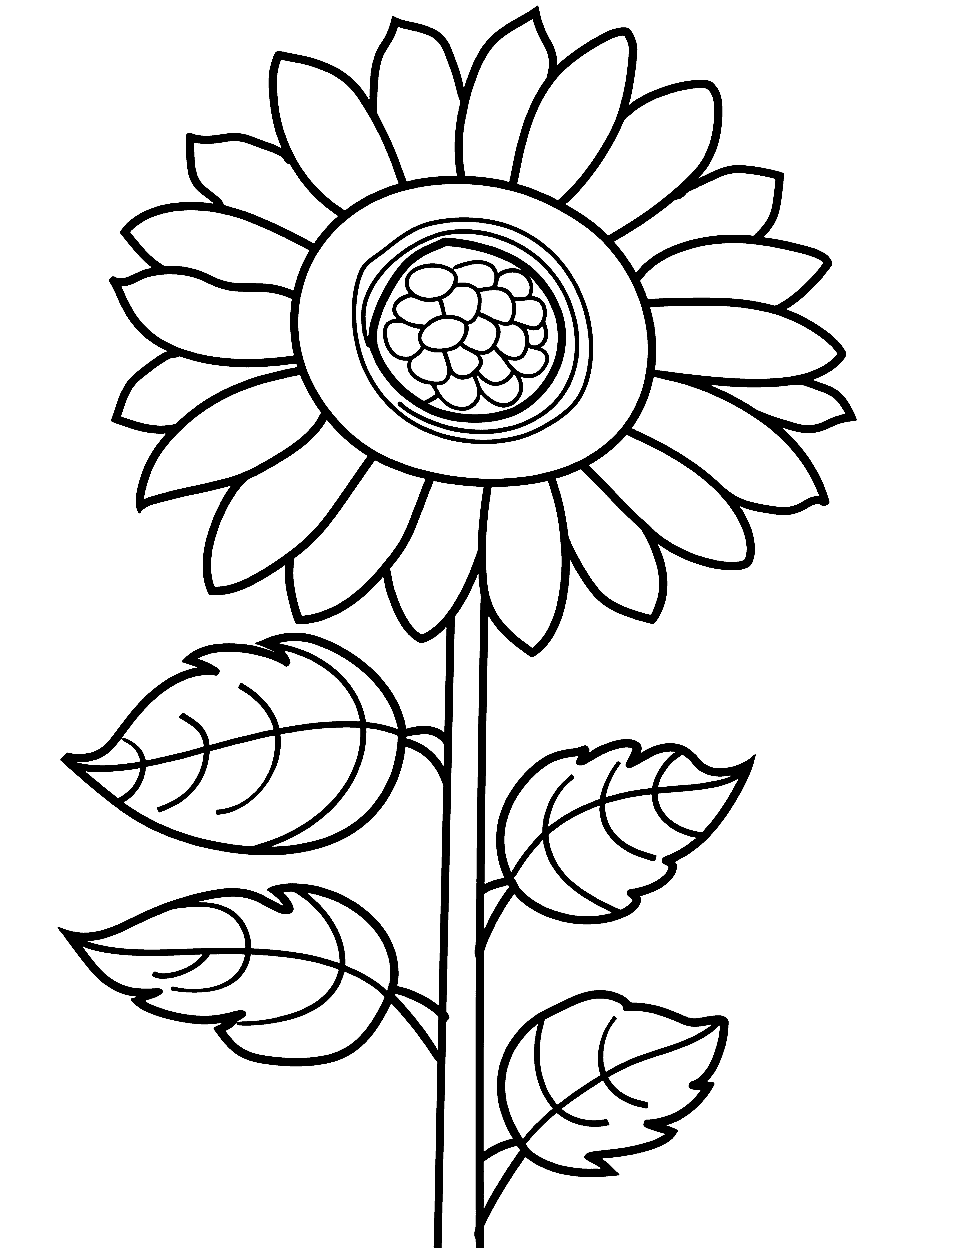 Tall Sunflower Coloring Page - A single tall sunflower.